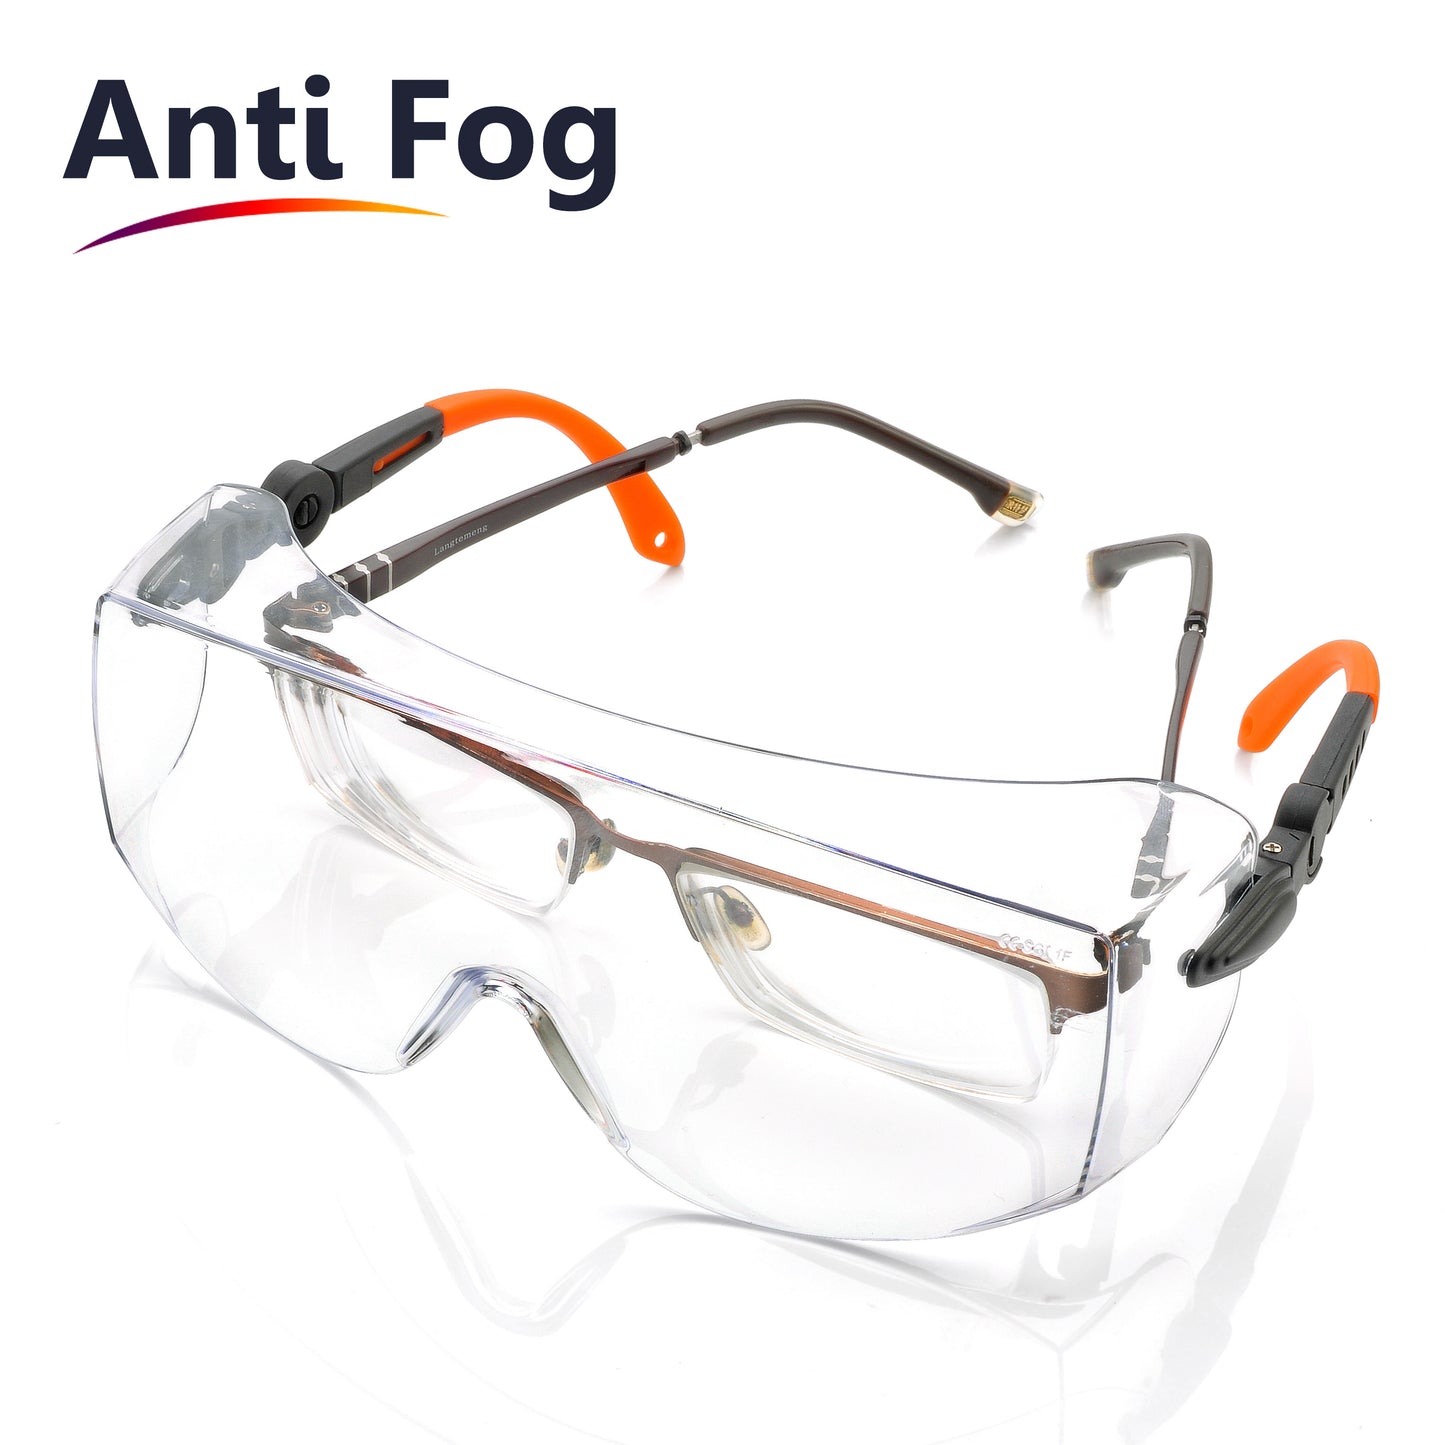 SAFEYEAR Anti Fog Safety Glasses with Clear Anti Scratch Resistant Lenses and No-Slip Grips, UV Protection Safety Over Prescription Glasses for DIY, Lab, Welding, Grinding,Cycling,MTB